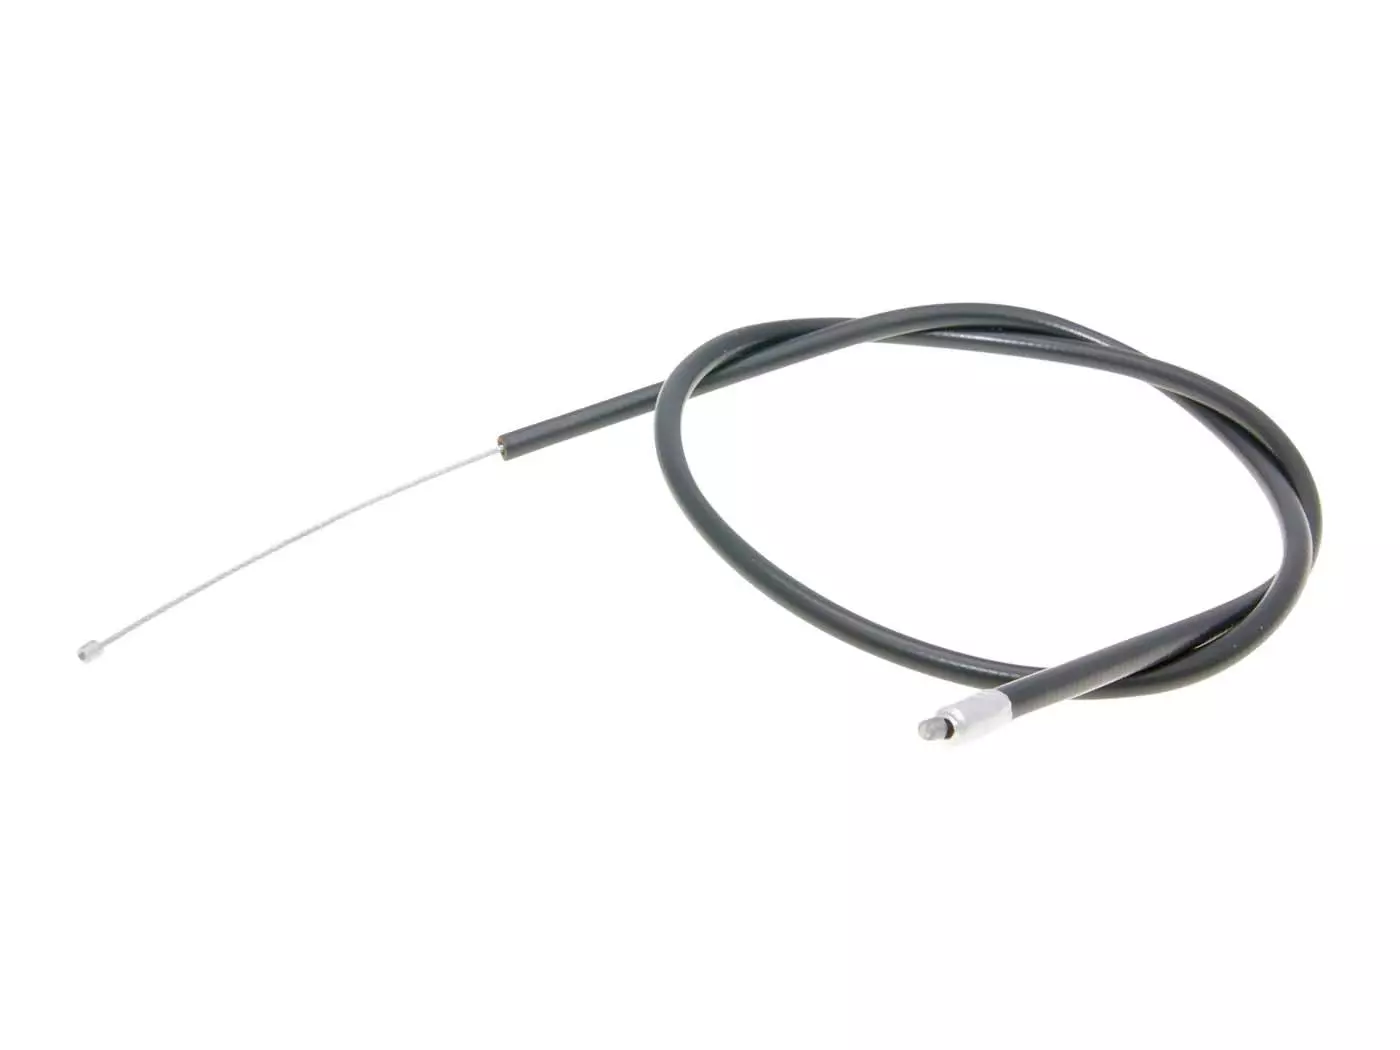 Lower Throttle Cable For Gilera Runner, Piaggio Liberty, NRG